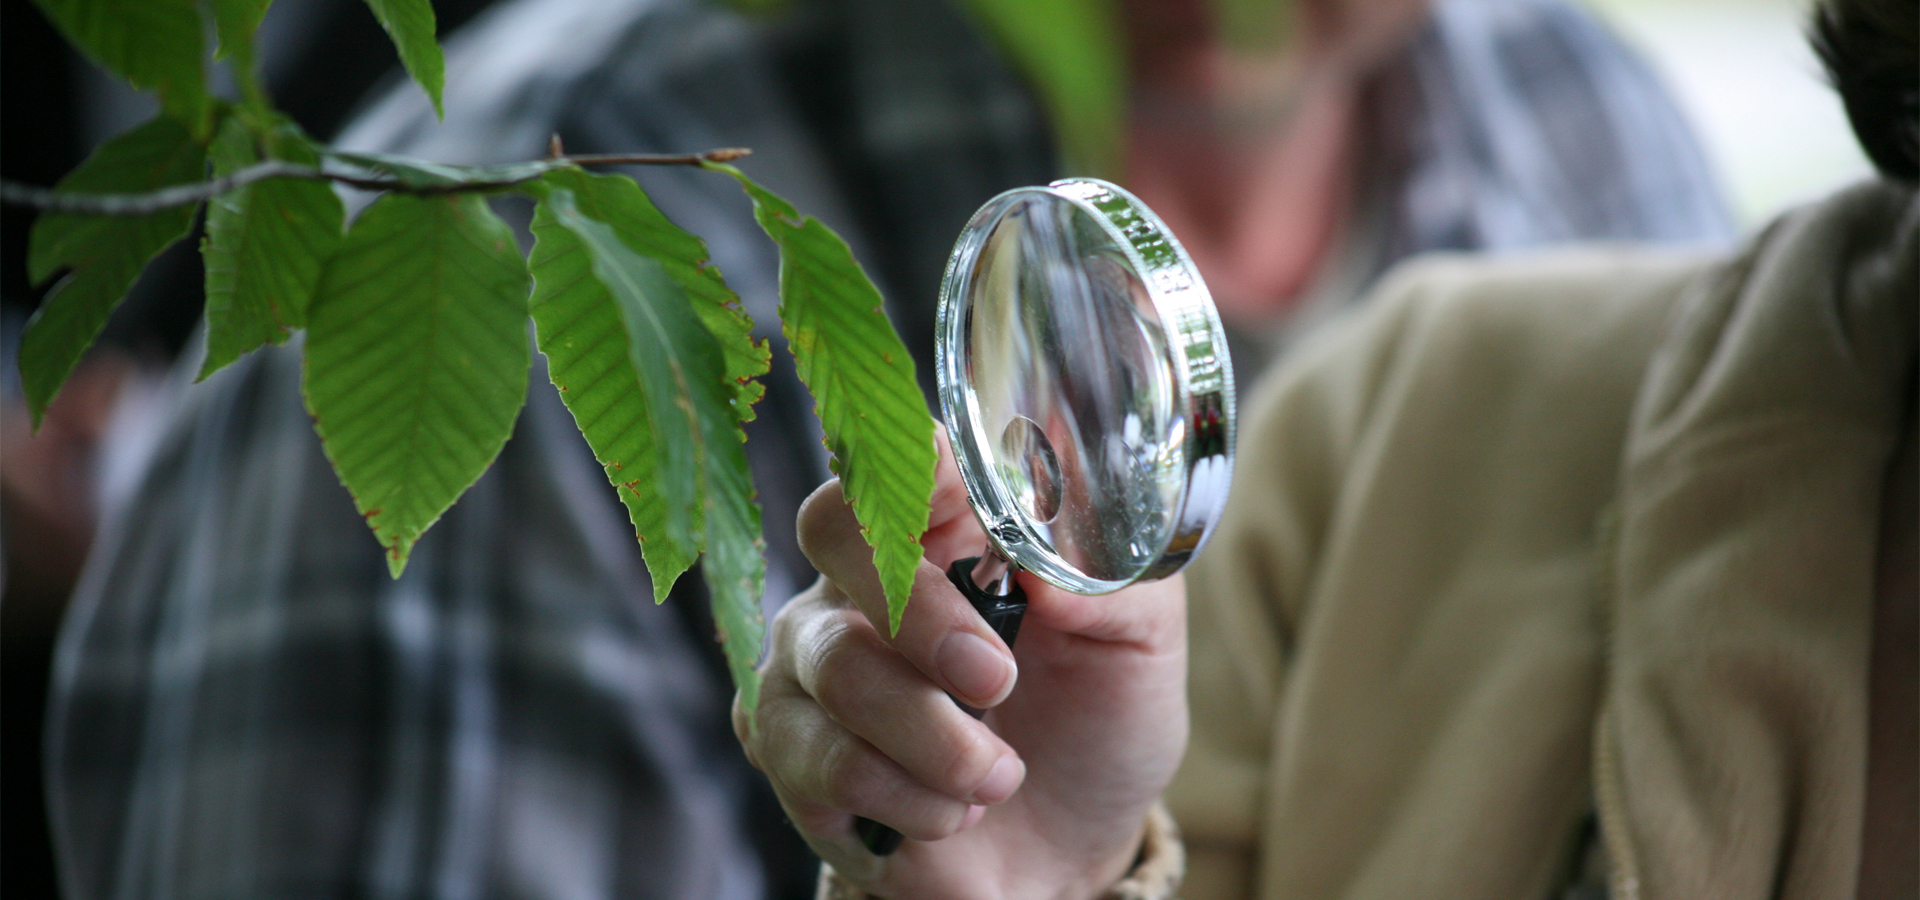 Instructor of Tree ID class using a magnifying glass to identify a leaf of a tree